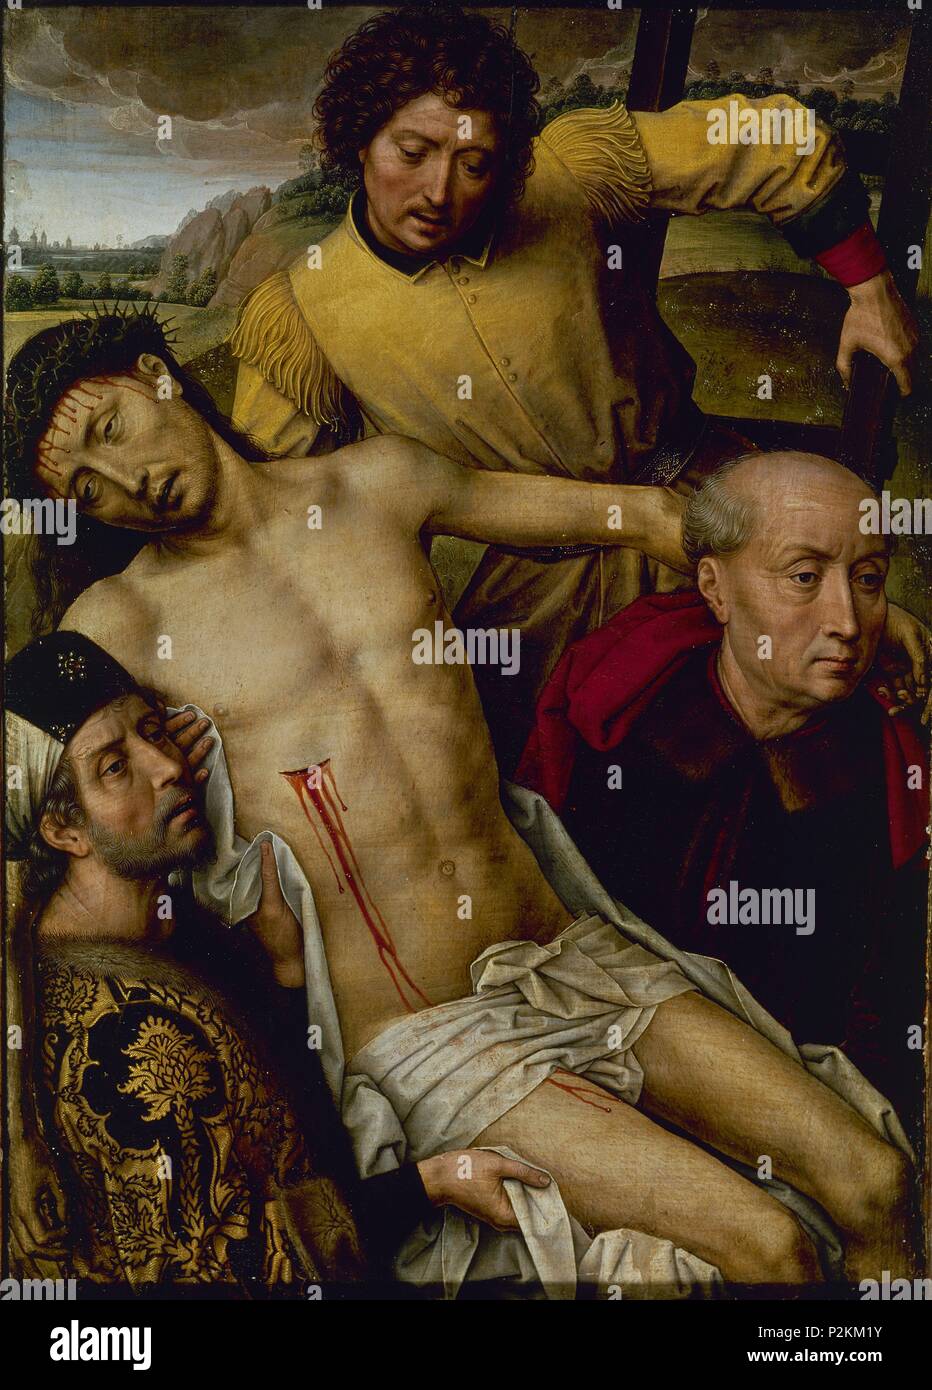 'The Descent from the Cross', 1480, Oil on panel, 53 x 38 cm. Author: Hans Memling (c. 1433-1494). Location: CATEDRAL-CAPILLA REAL-INTERIOR, GRANADA, SPAIN. Also known as: DESCENDIMIENTO. Stock Photo